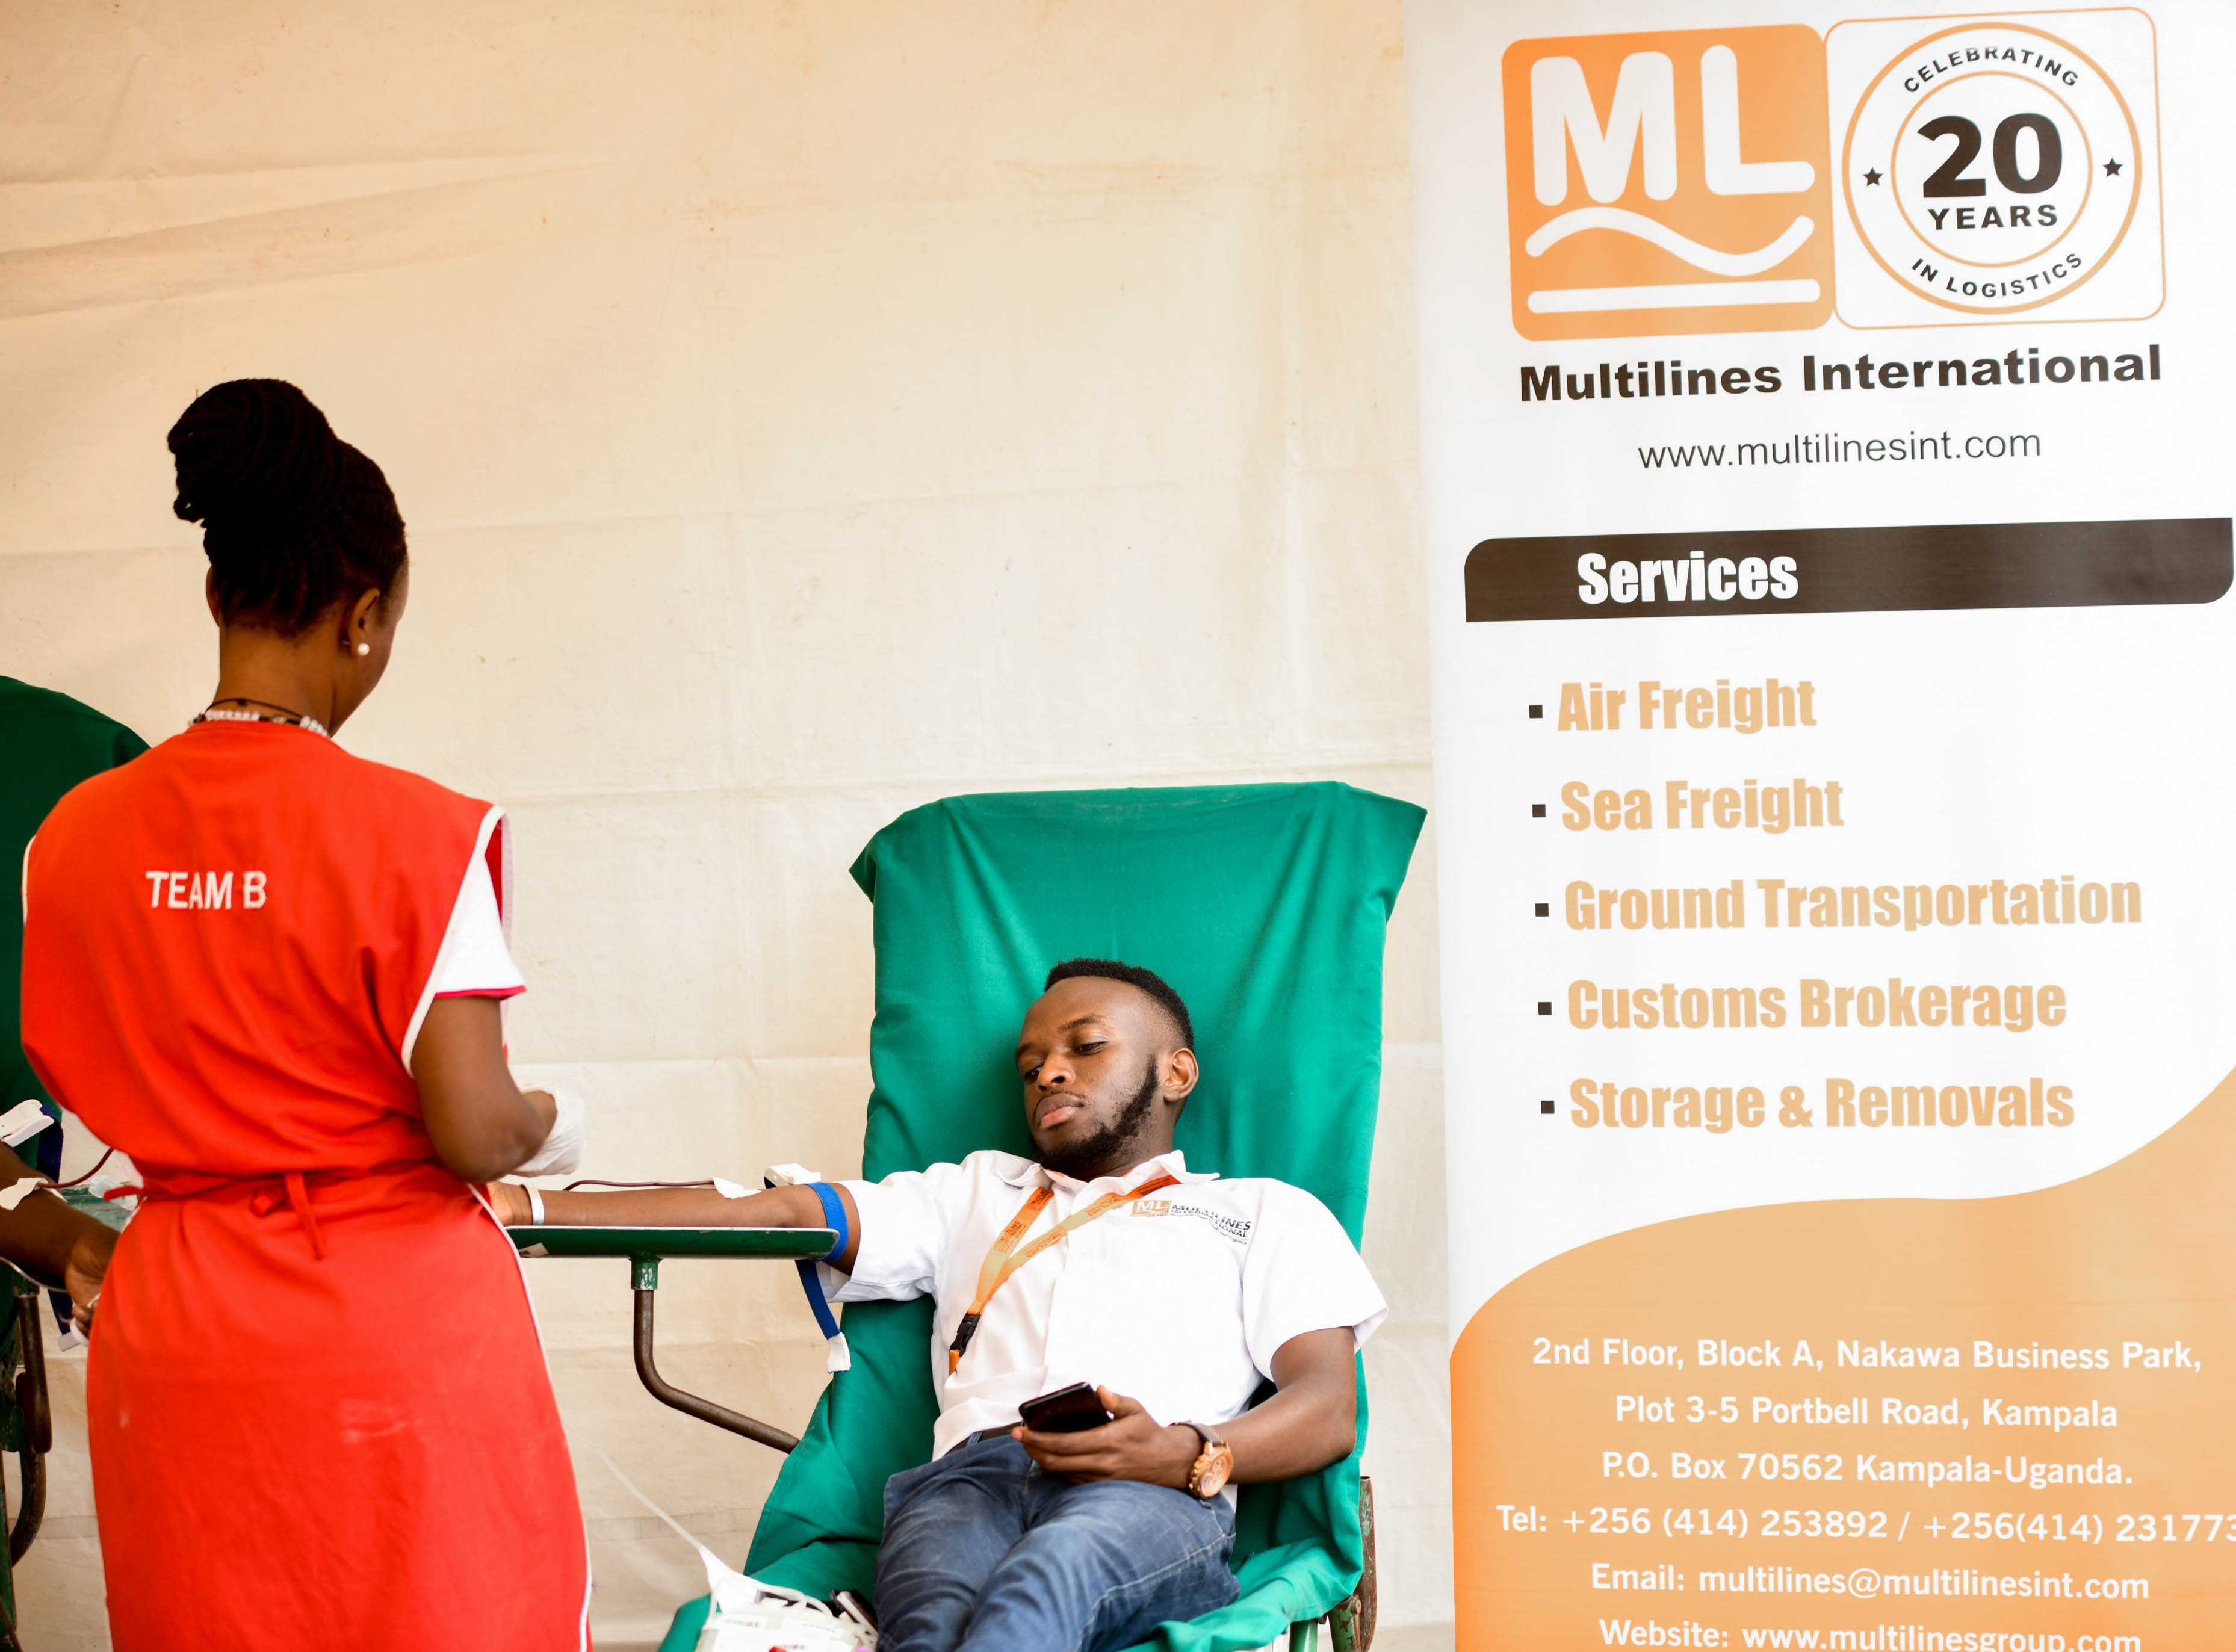 Multilines launches 20-year celebrations: Successful blood donation drive at Nakawa Business Park.